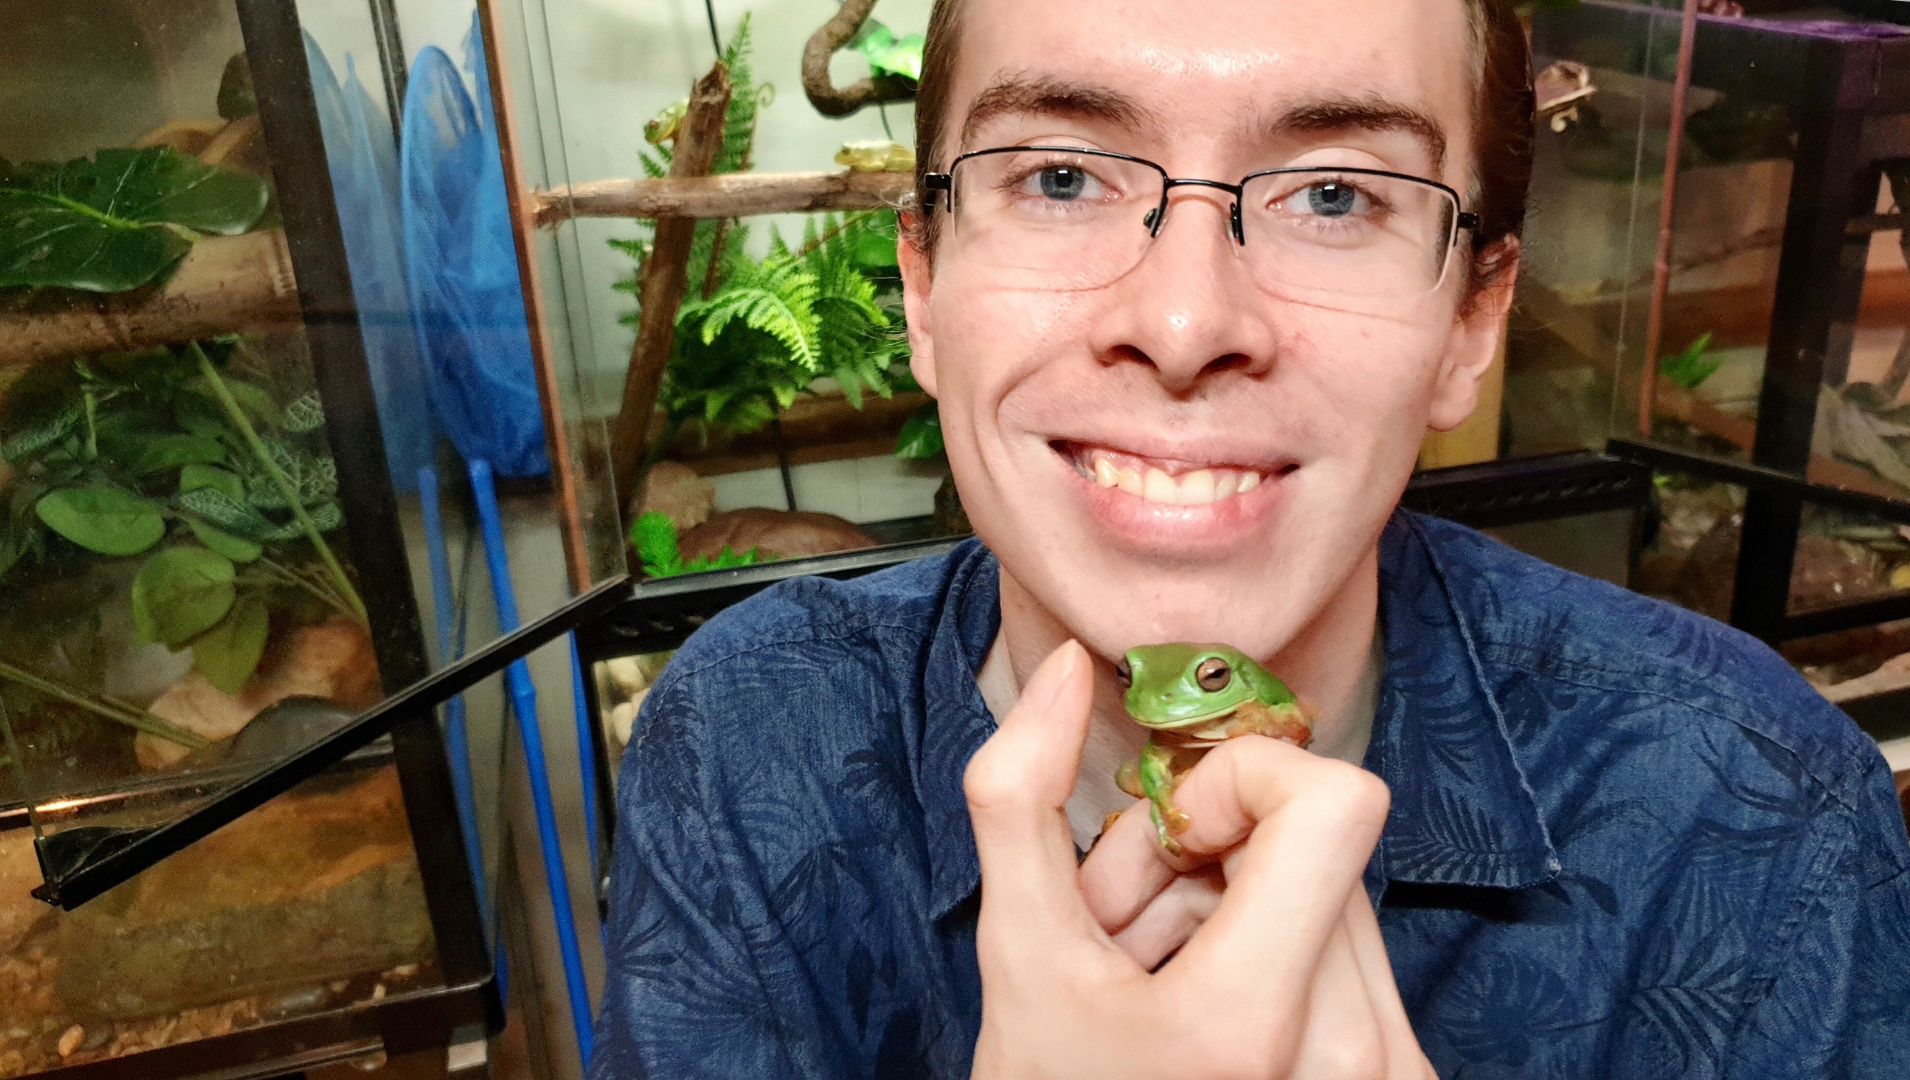 Aiden is pictured in the centre of the photo smiling with a green tree frog in his hand